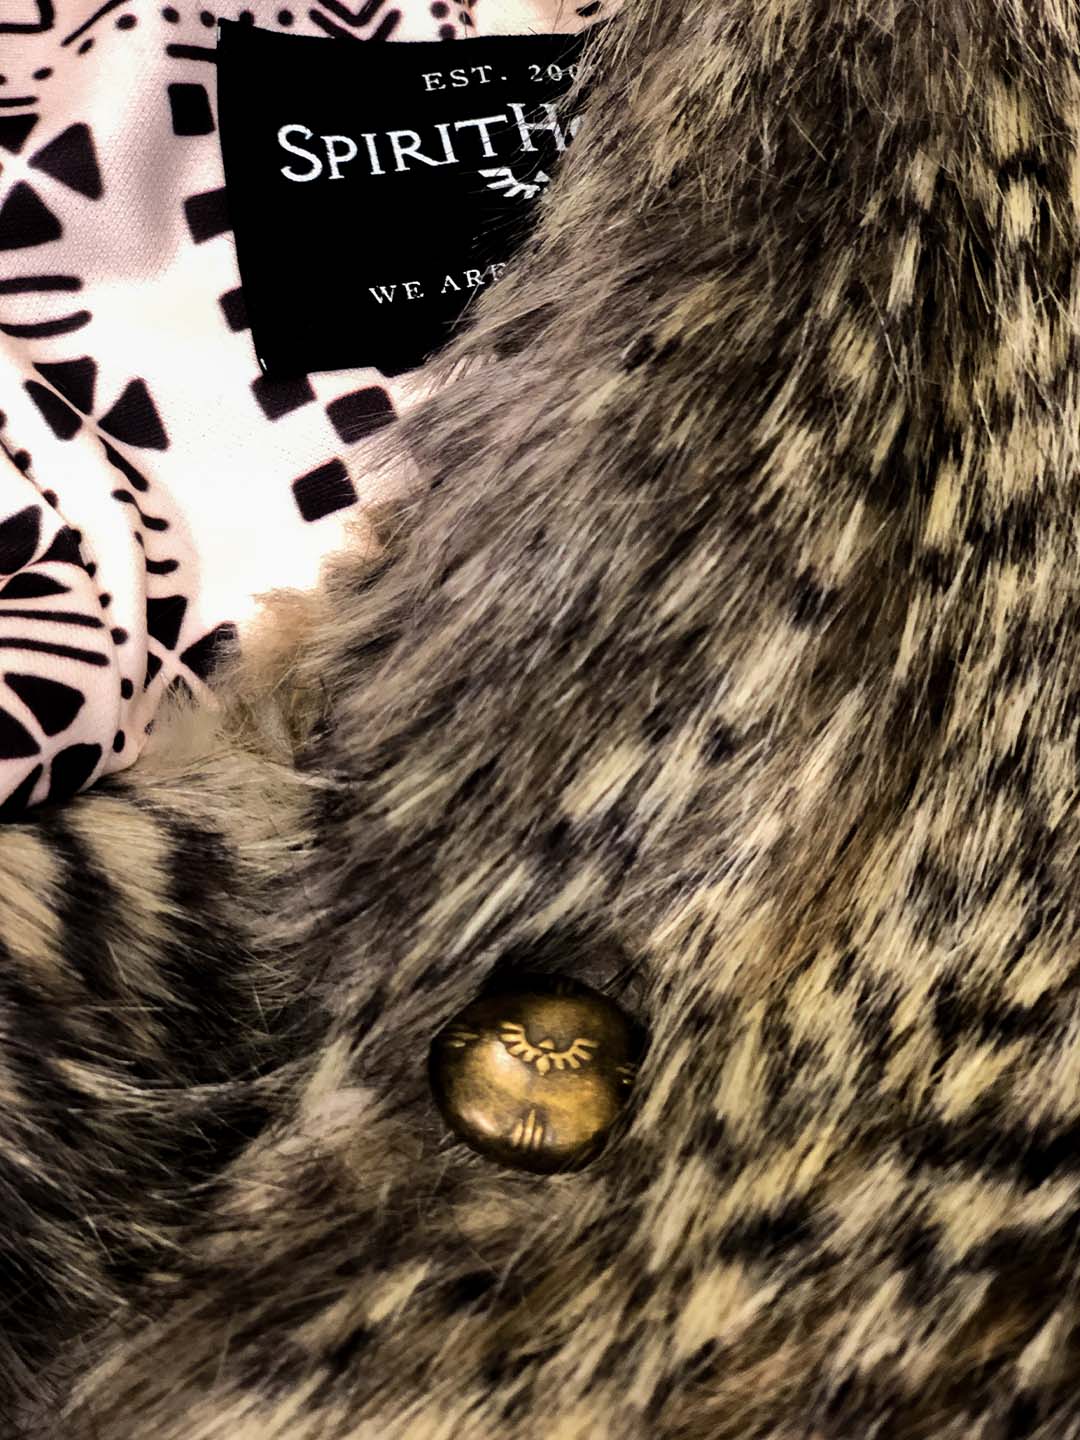 Close Up of Custom Button on Le Hibou Grand-Duc Limited Edition SpiritHood 